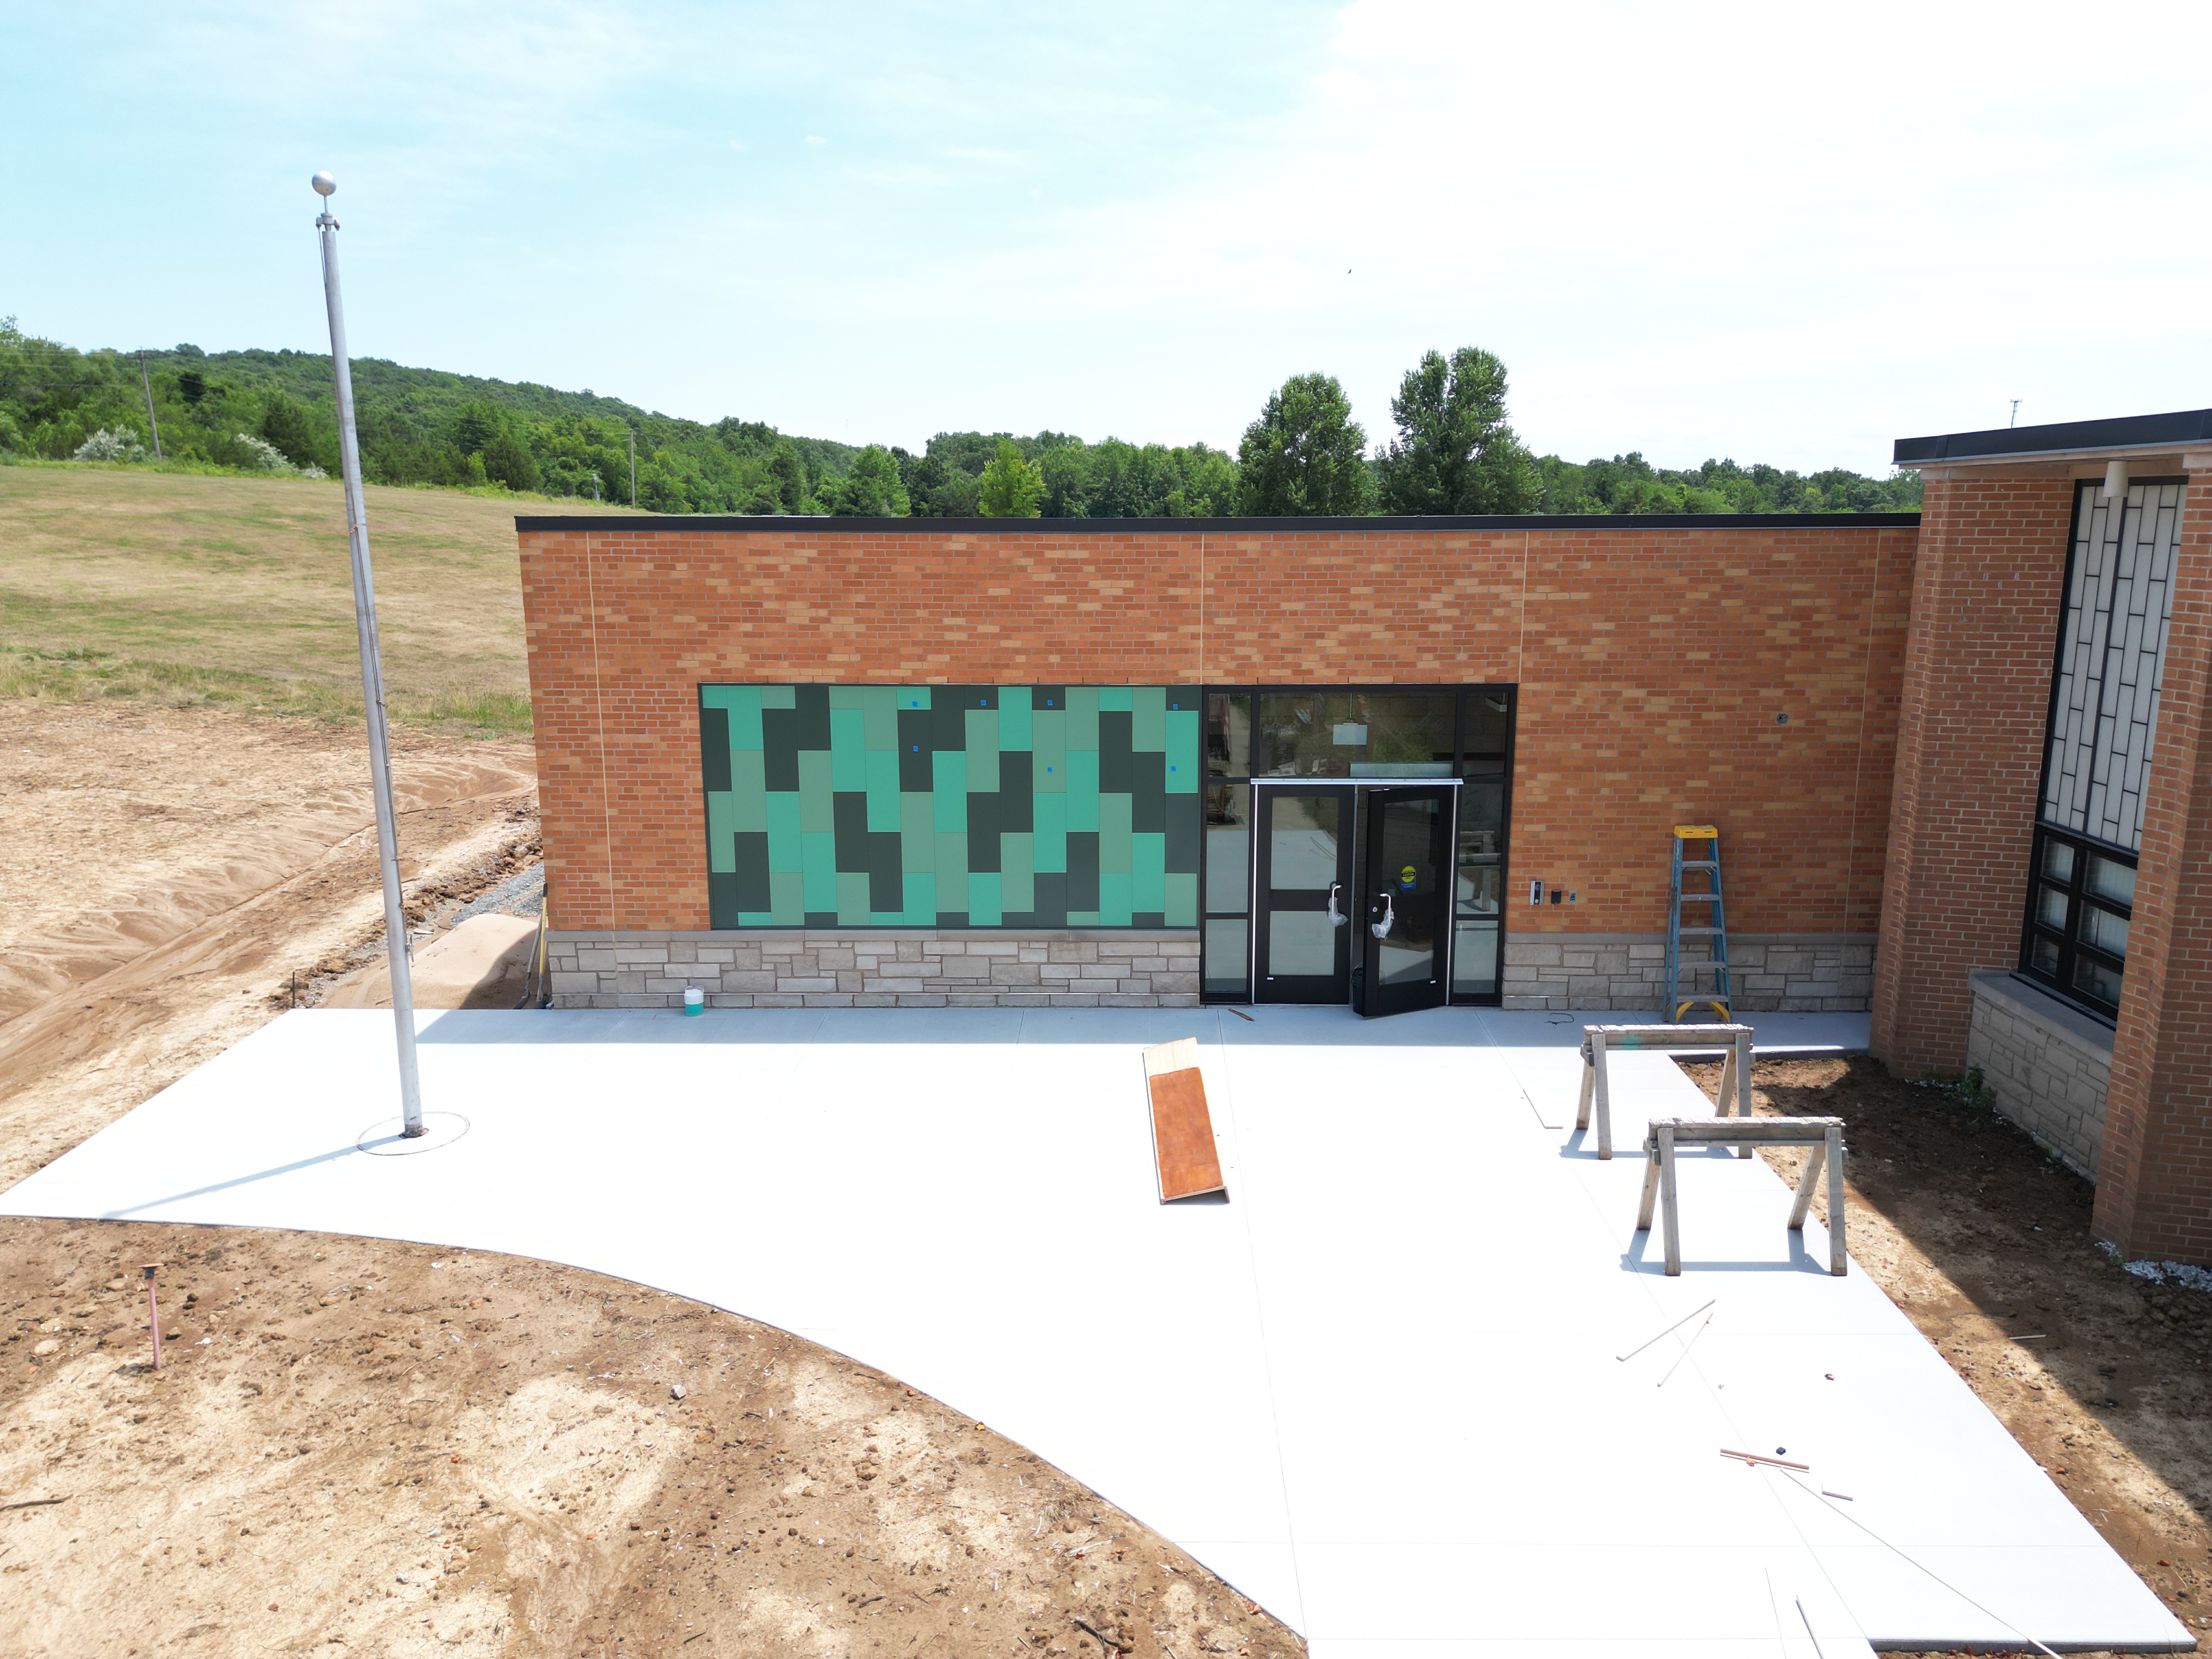 Bloomsdale Elementary Project Progress Photo